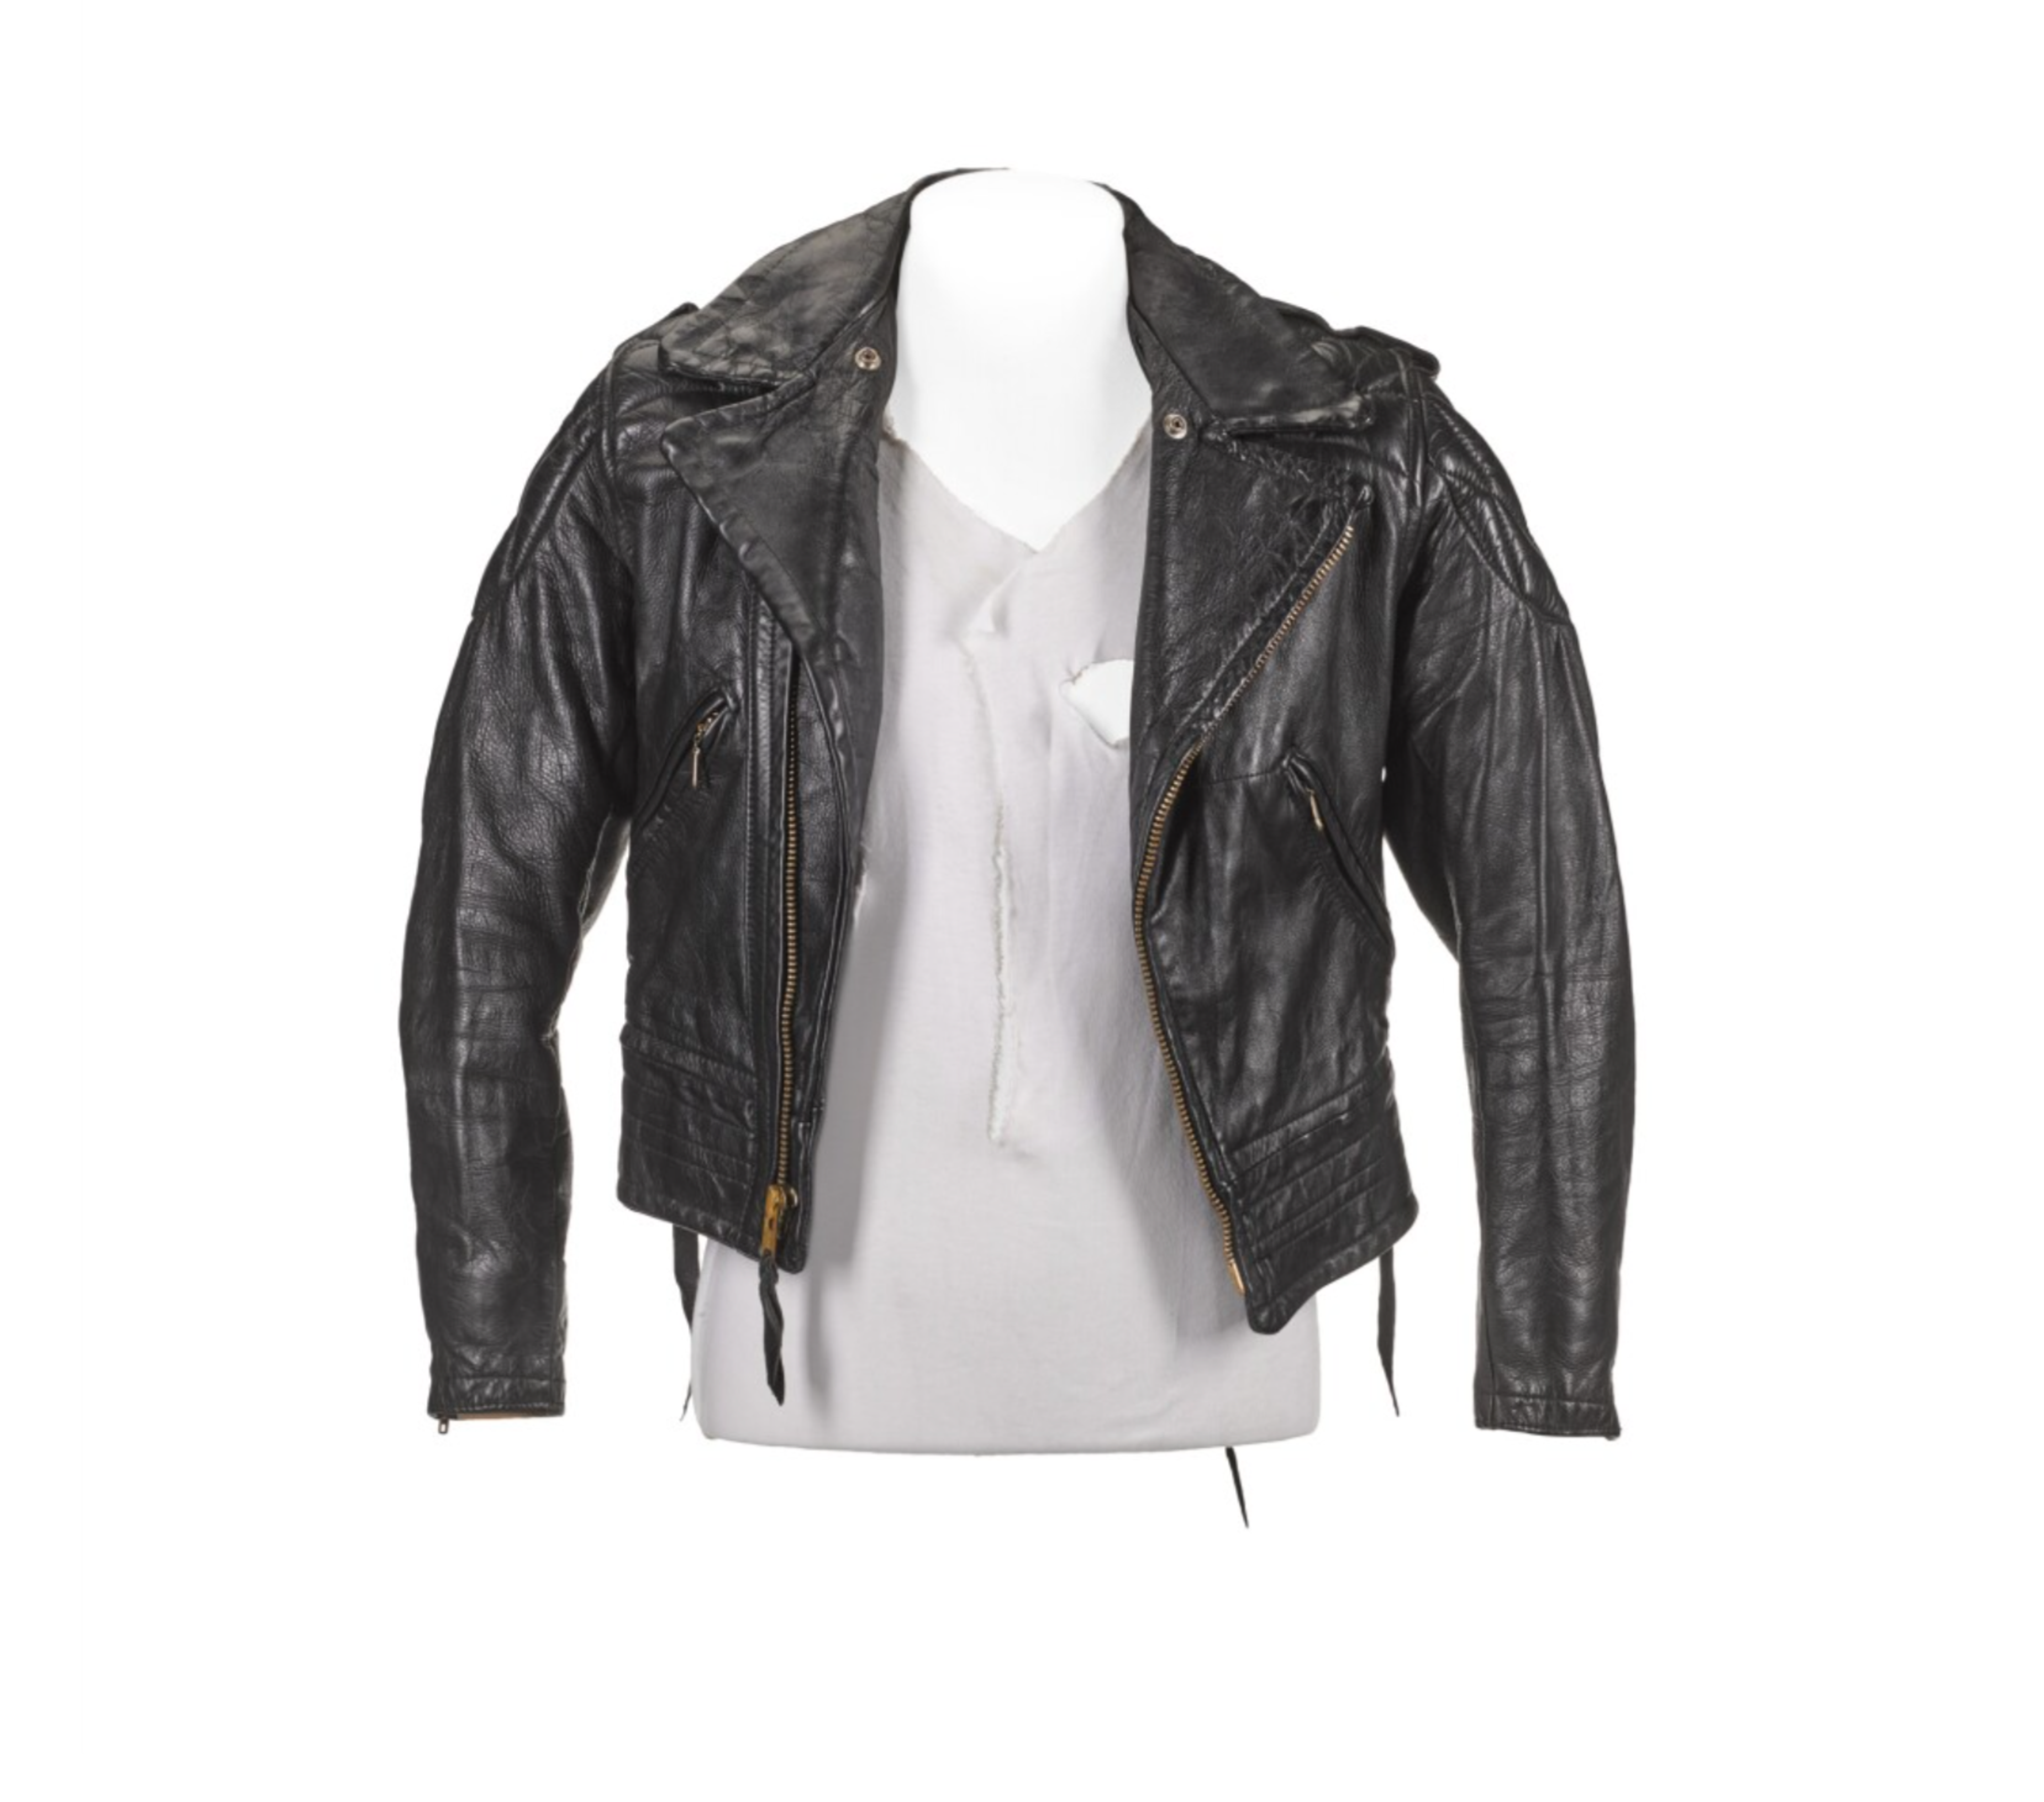 An image of a black leather jacket owned by Freddie Mercury